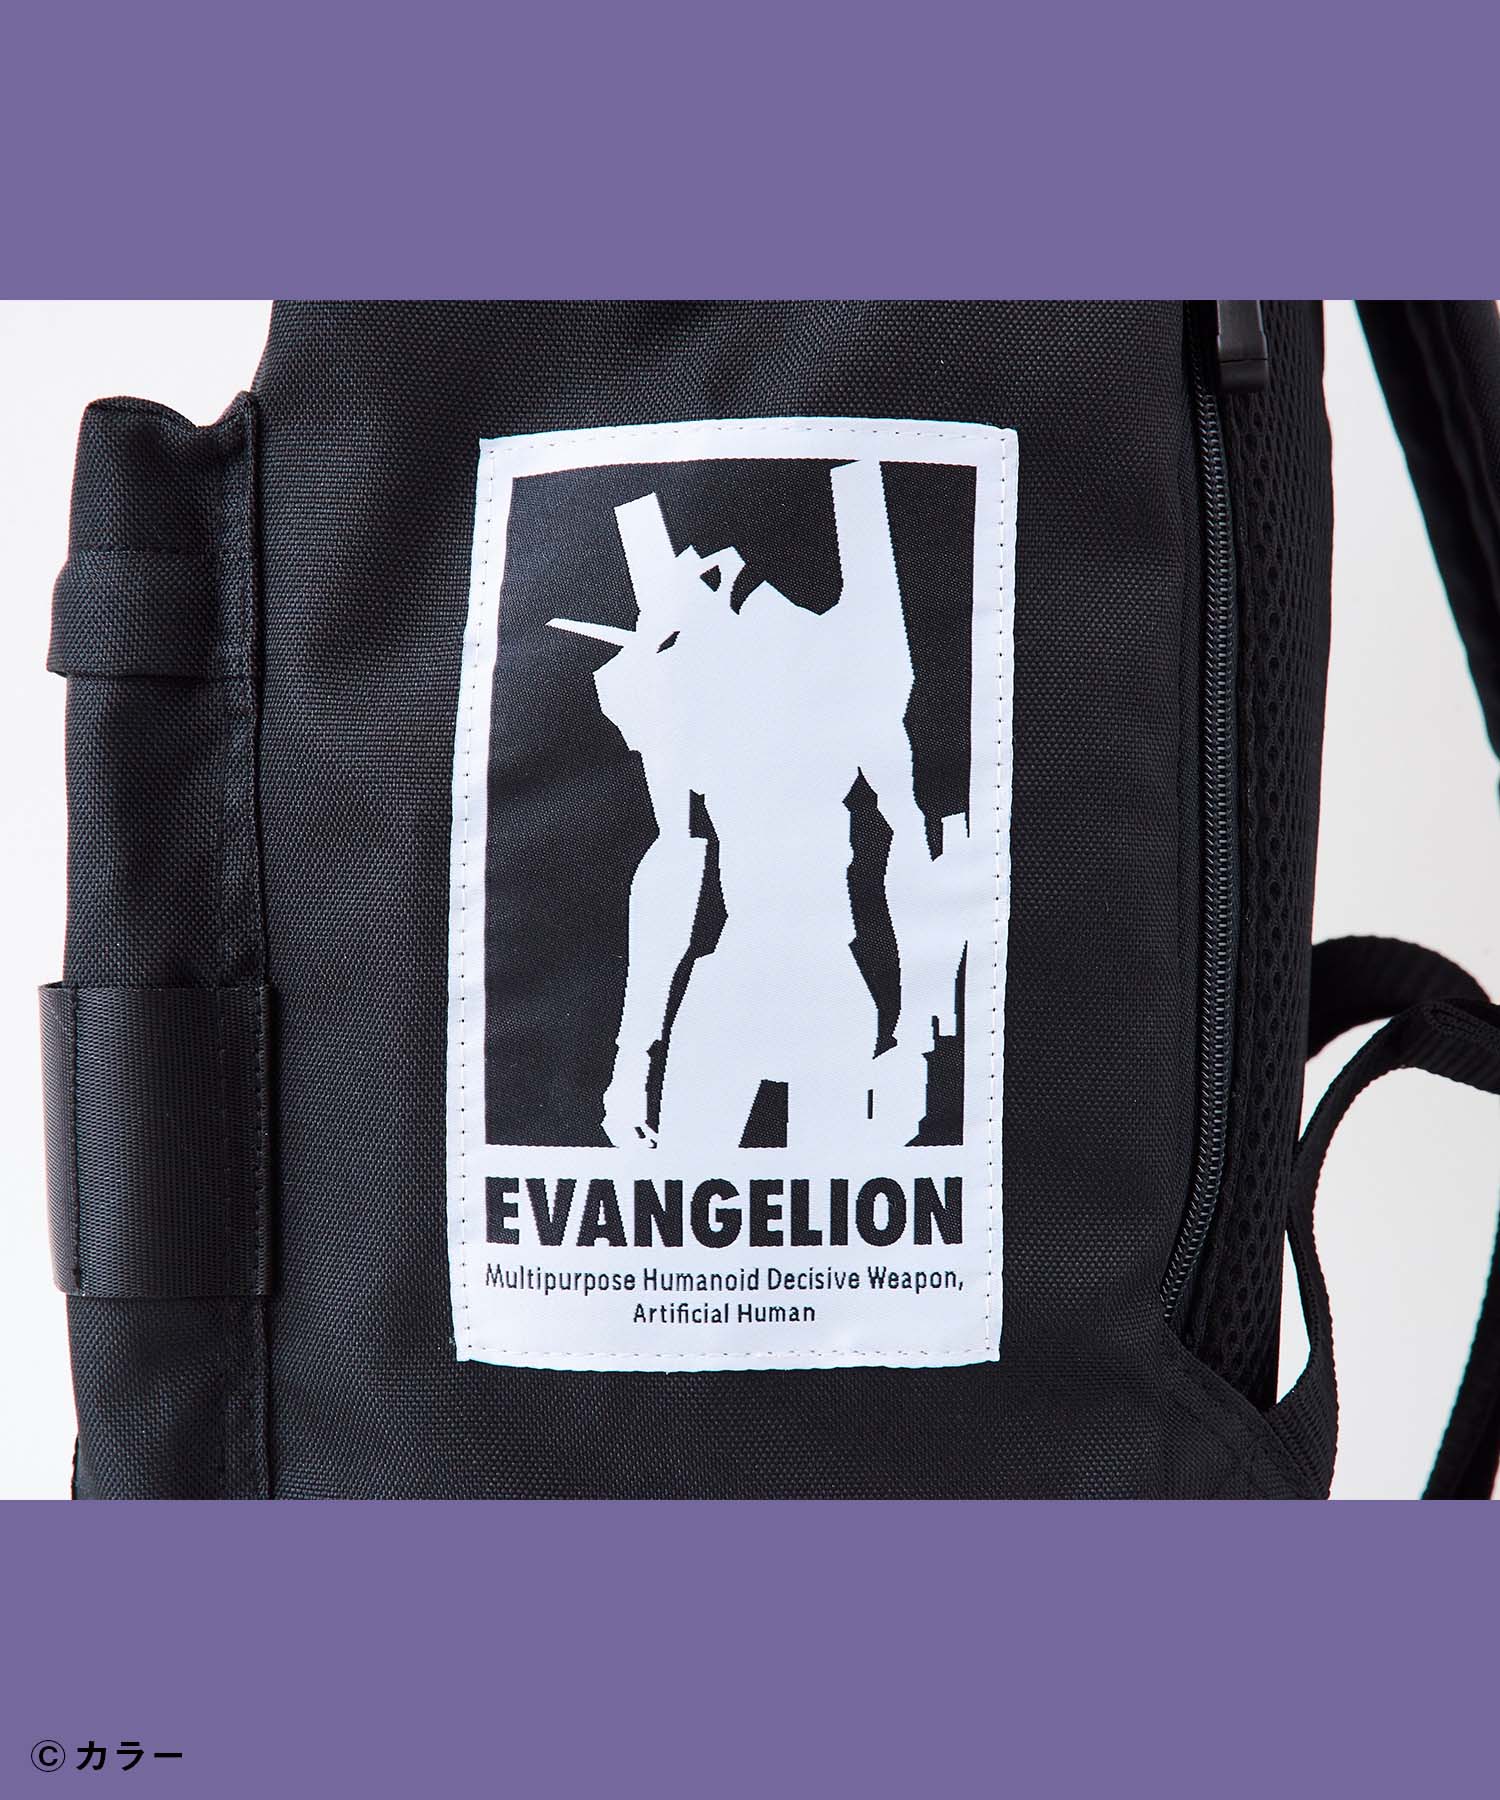 Outdoor Products ｅｖａｎｇｅｌｉｏｎコラボ ボックスリュック エヴァンゲリオン アニメ ロンギヌスの槍 バックパック Outdoor Products アウトドアプロダクツ Outdoor Products 公式通販サイト